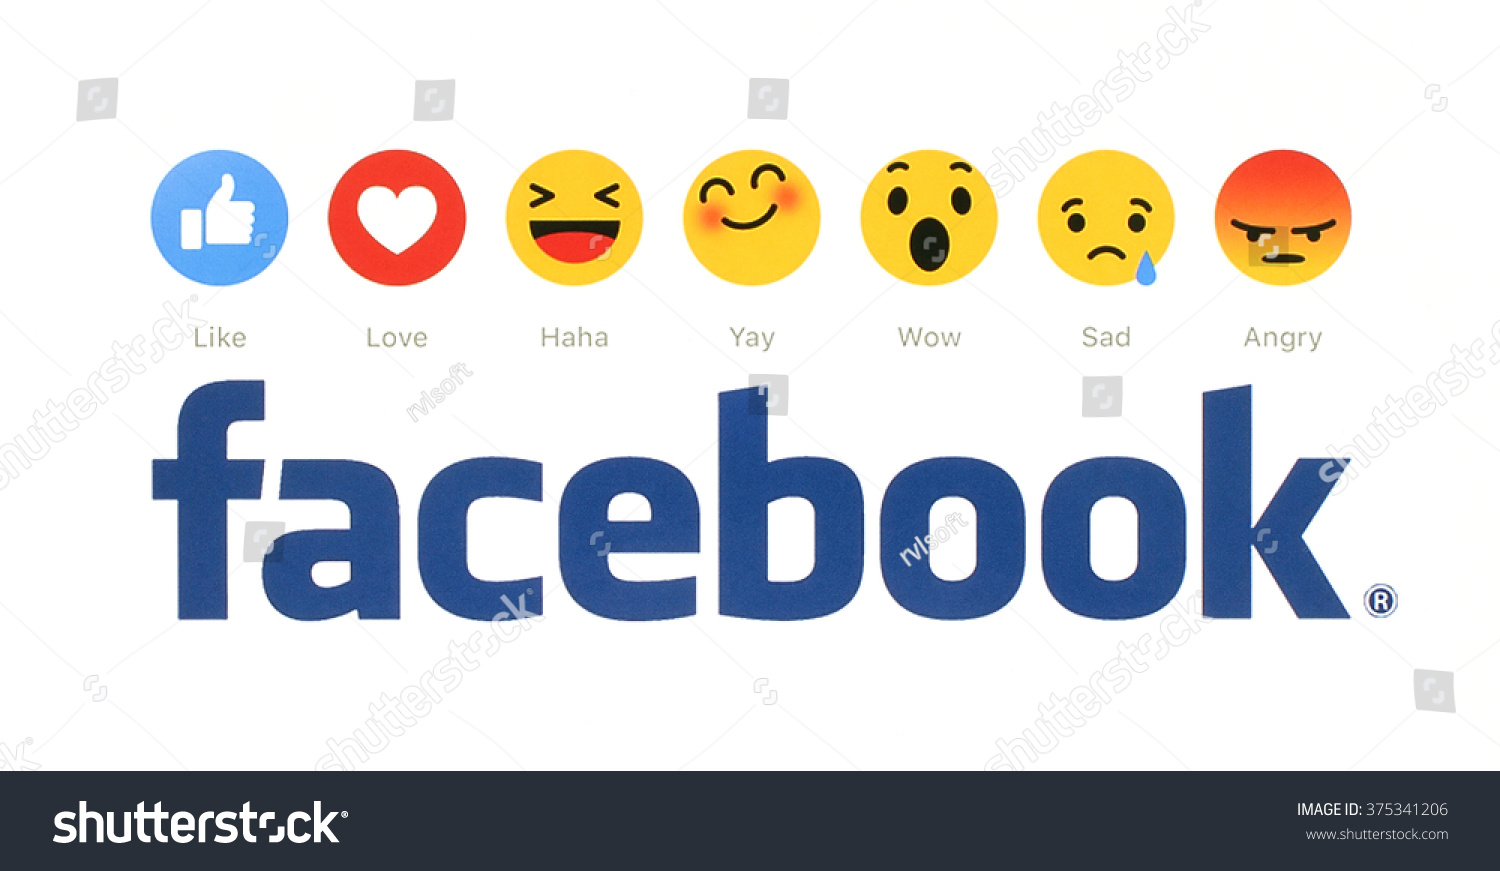 Kiev, Ukraine - February 9, 2016: New Facebook like button 6 Empathetic Emoji Reactions printed on white paper. Facebook is a well-known social networking service.